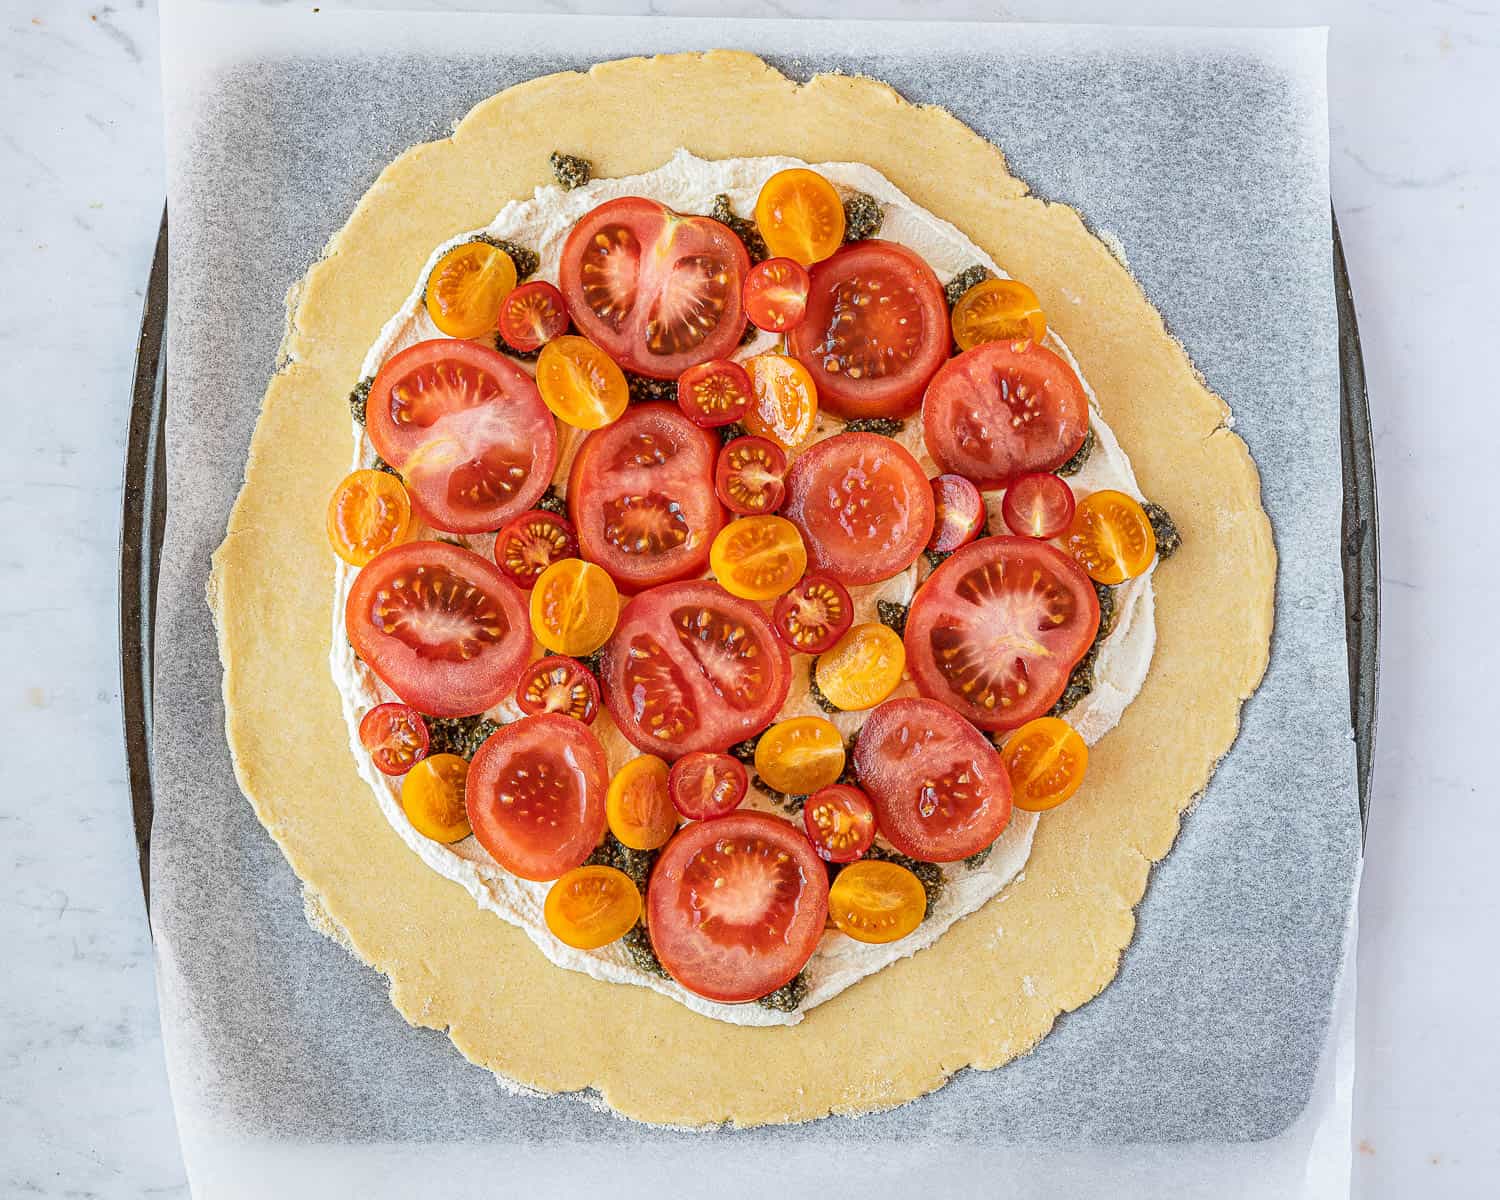 The pastry topped with tomatoes.